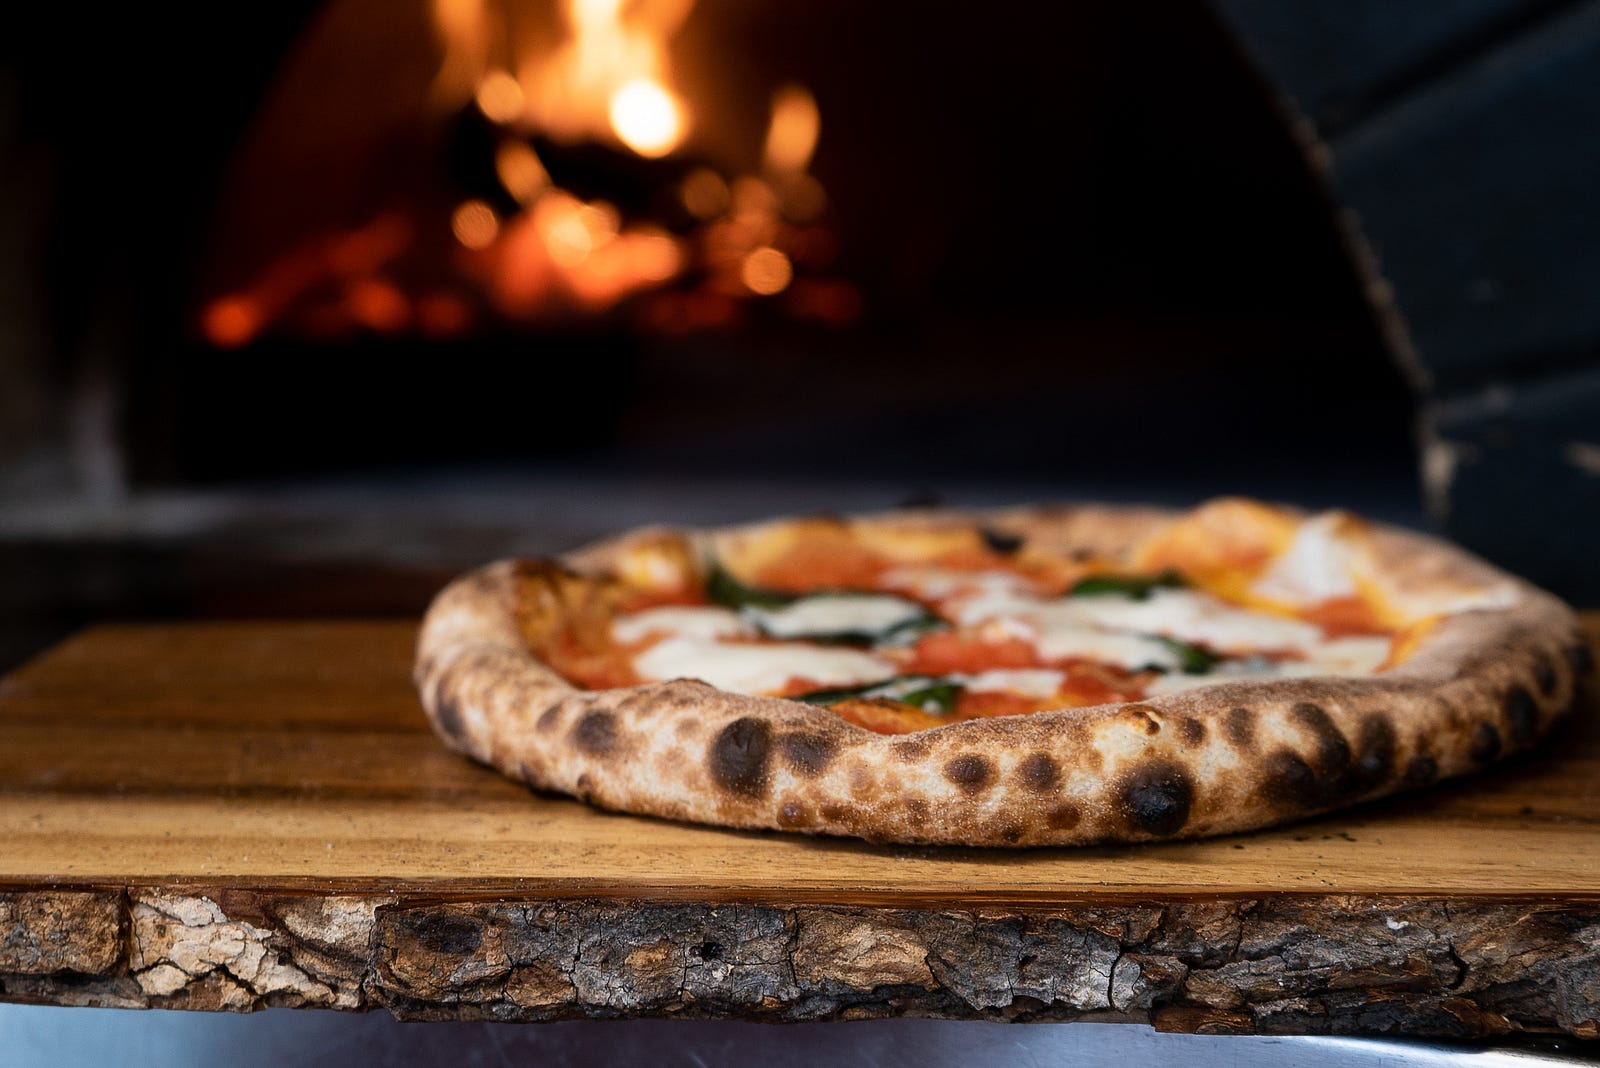 A pizza sits in front of a wood-fired oven. Too much (or too little) salt is bad for health.